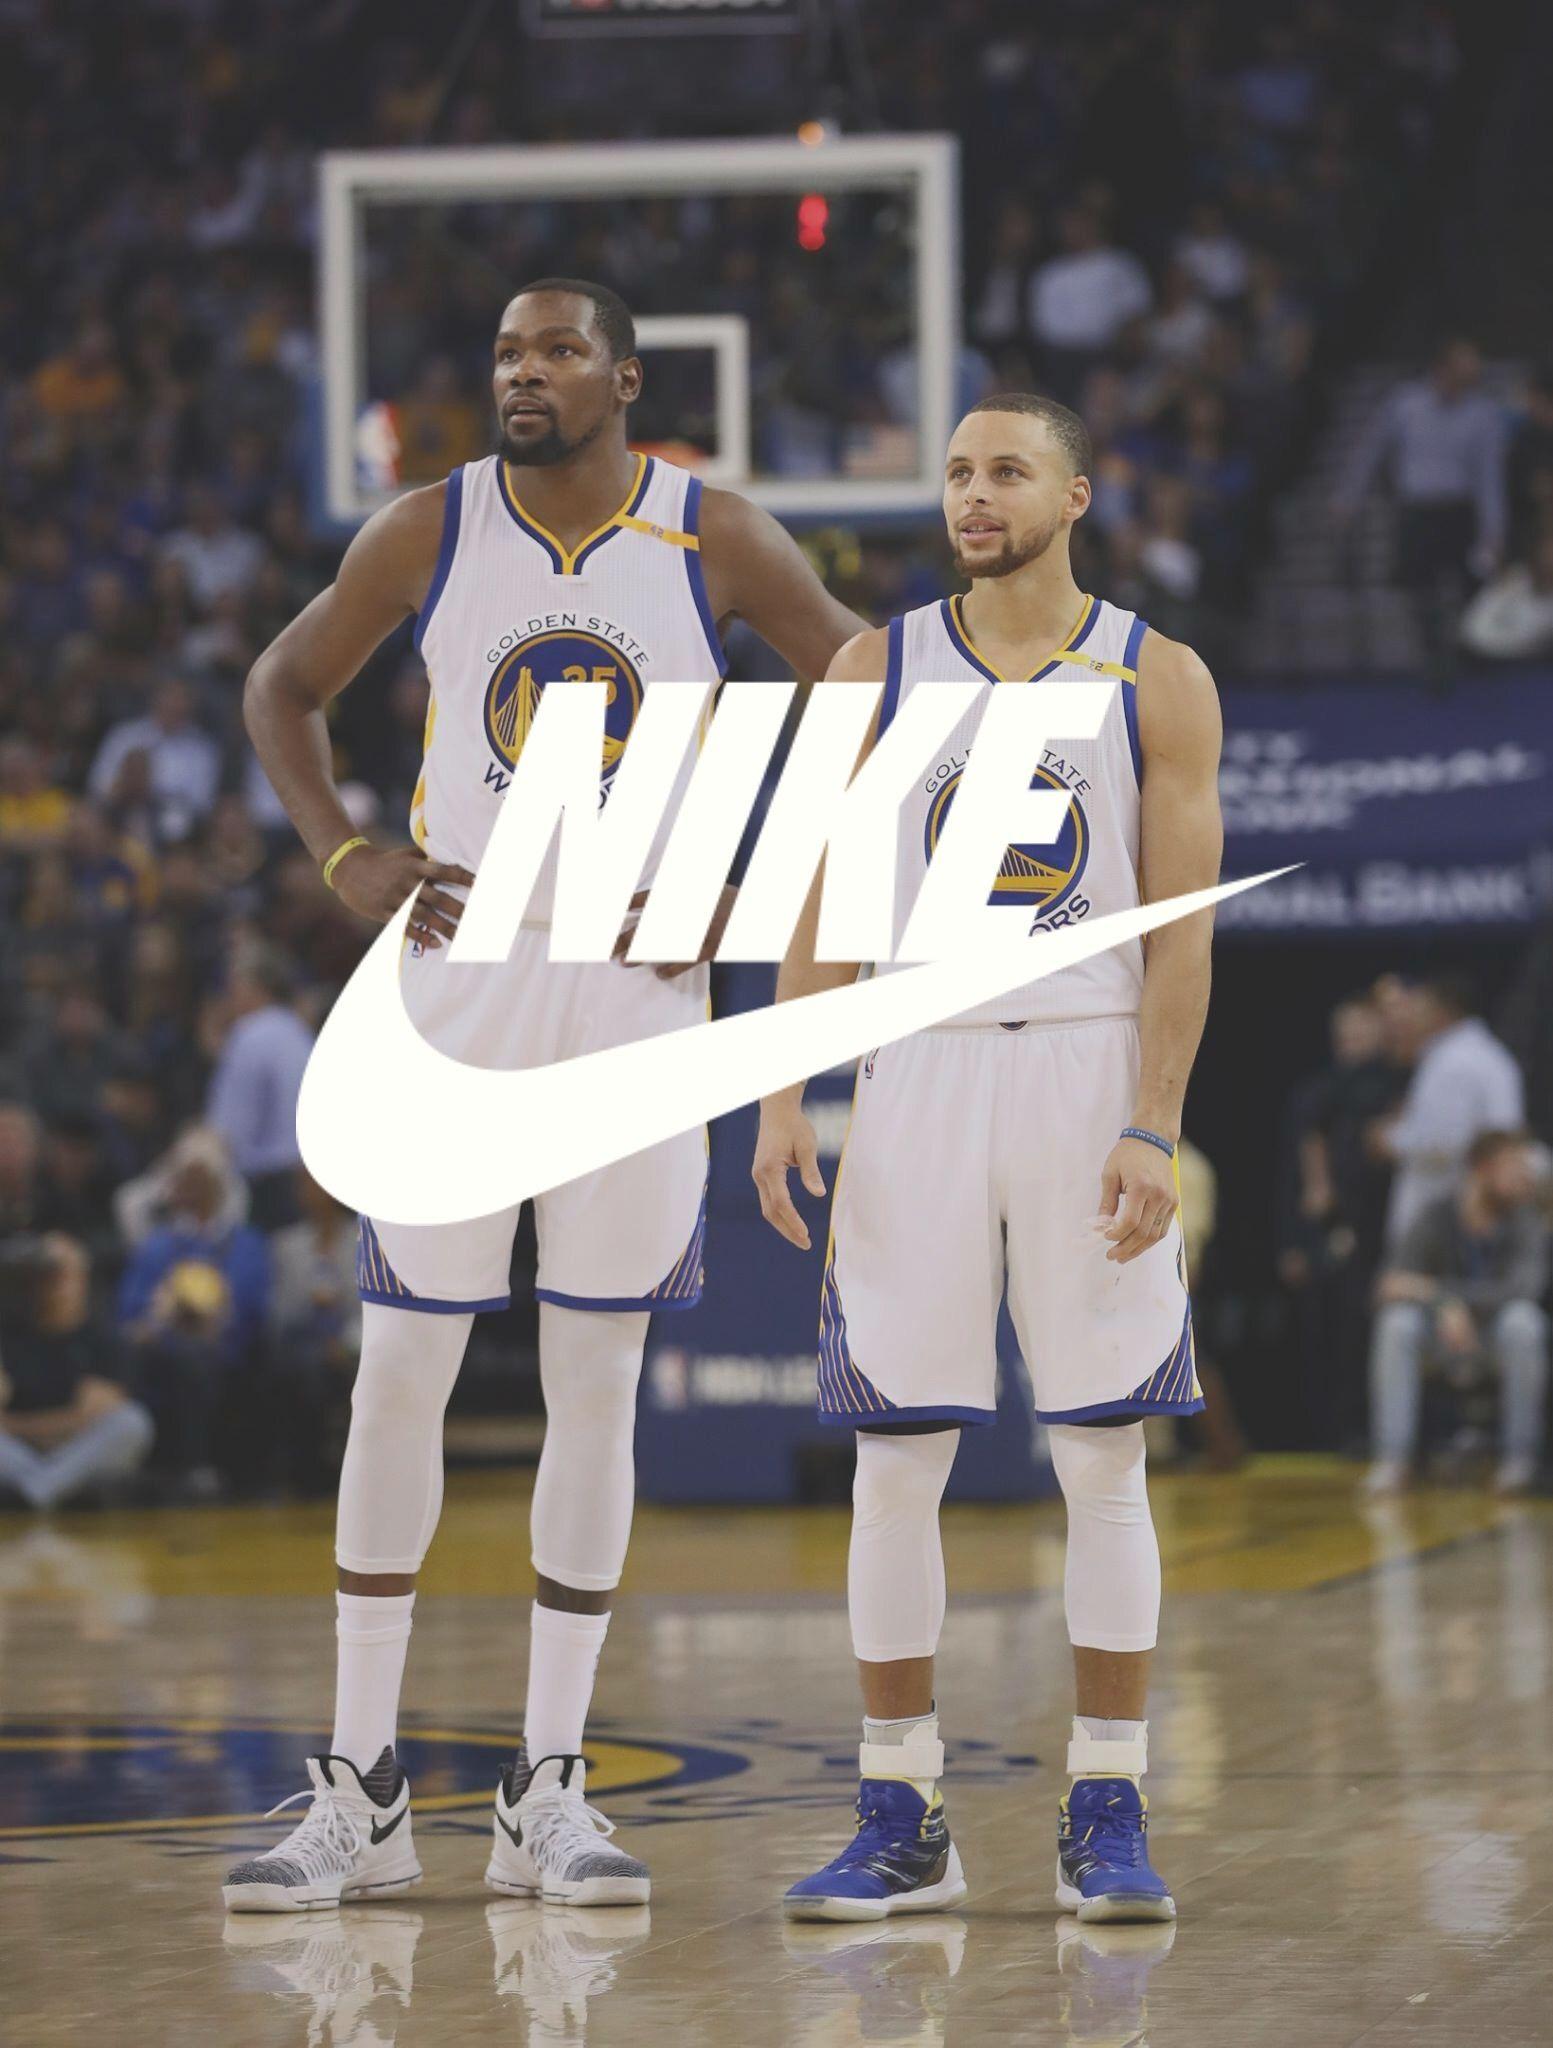 Nike Wallpaper Kevin Durant Stephen Curry. Sports basketball, Kevin durant, Nike wallpaper